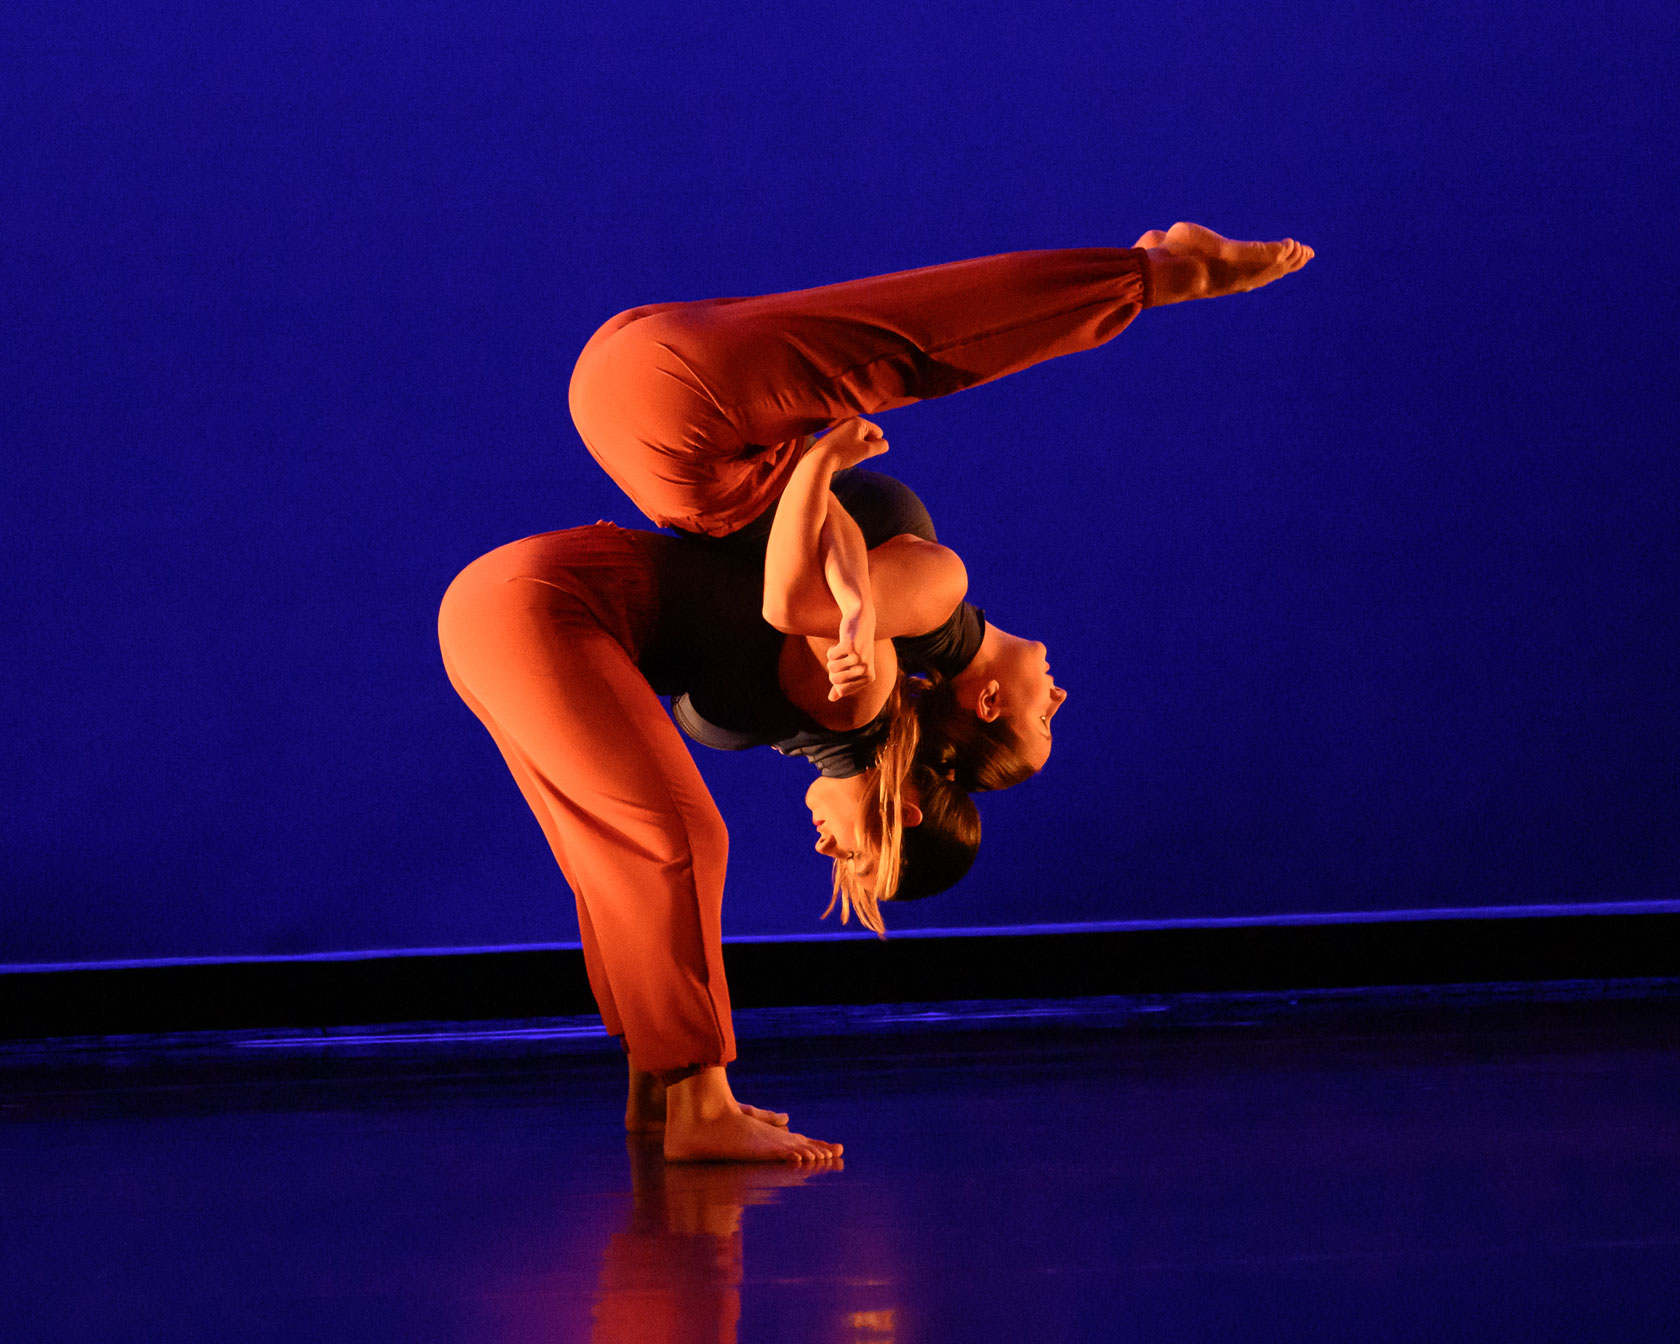 Dancers in performance